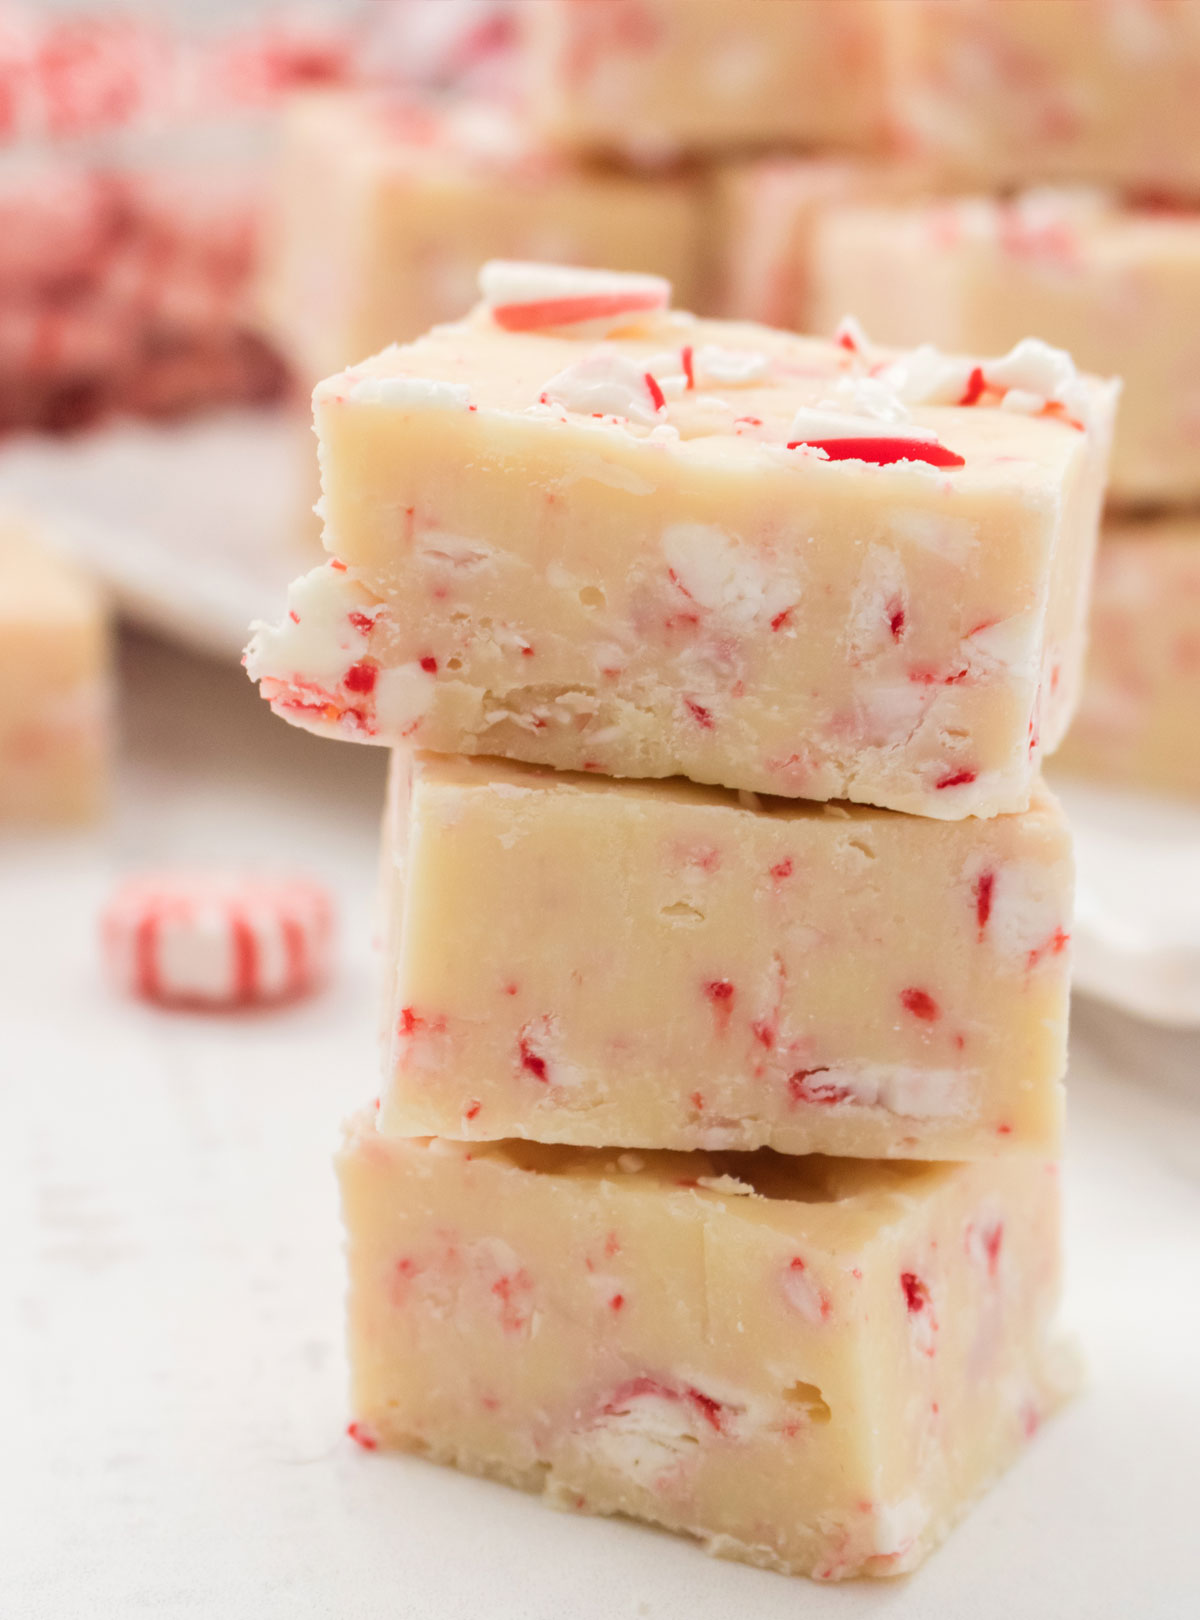 Closeup on a stack of three Peppermint Fudge candies sitting on a white table in front of a serving platter filled with Peppermint Fudge.